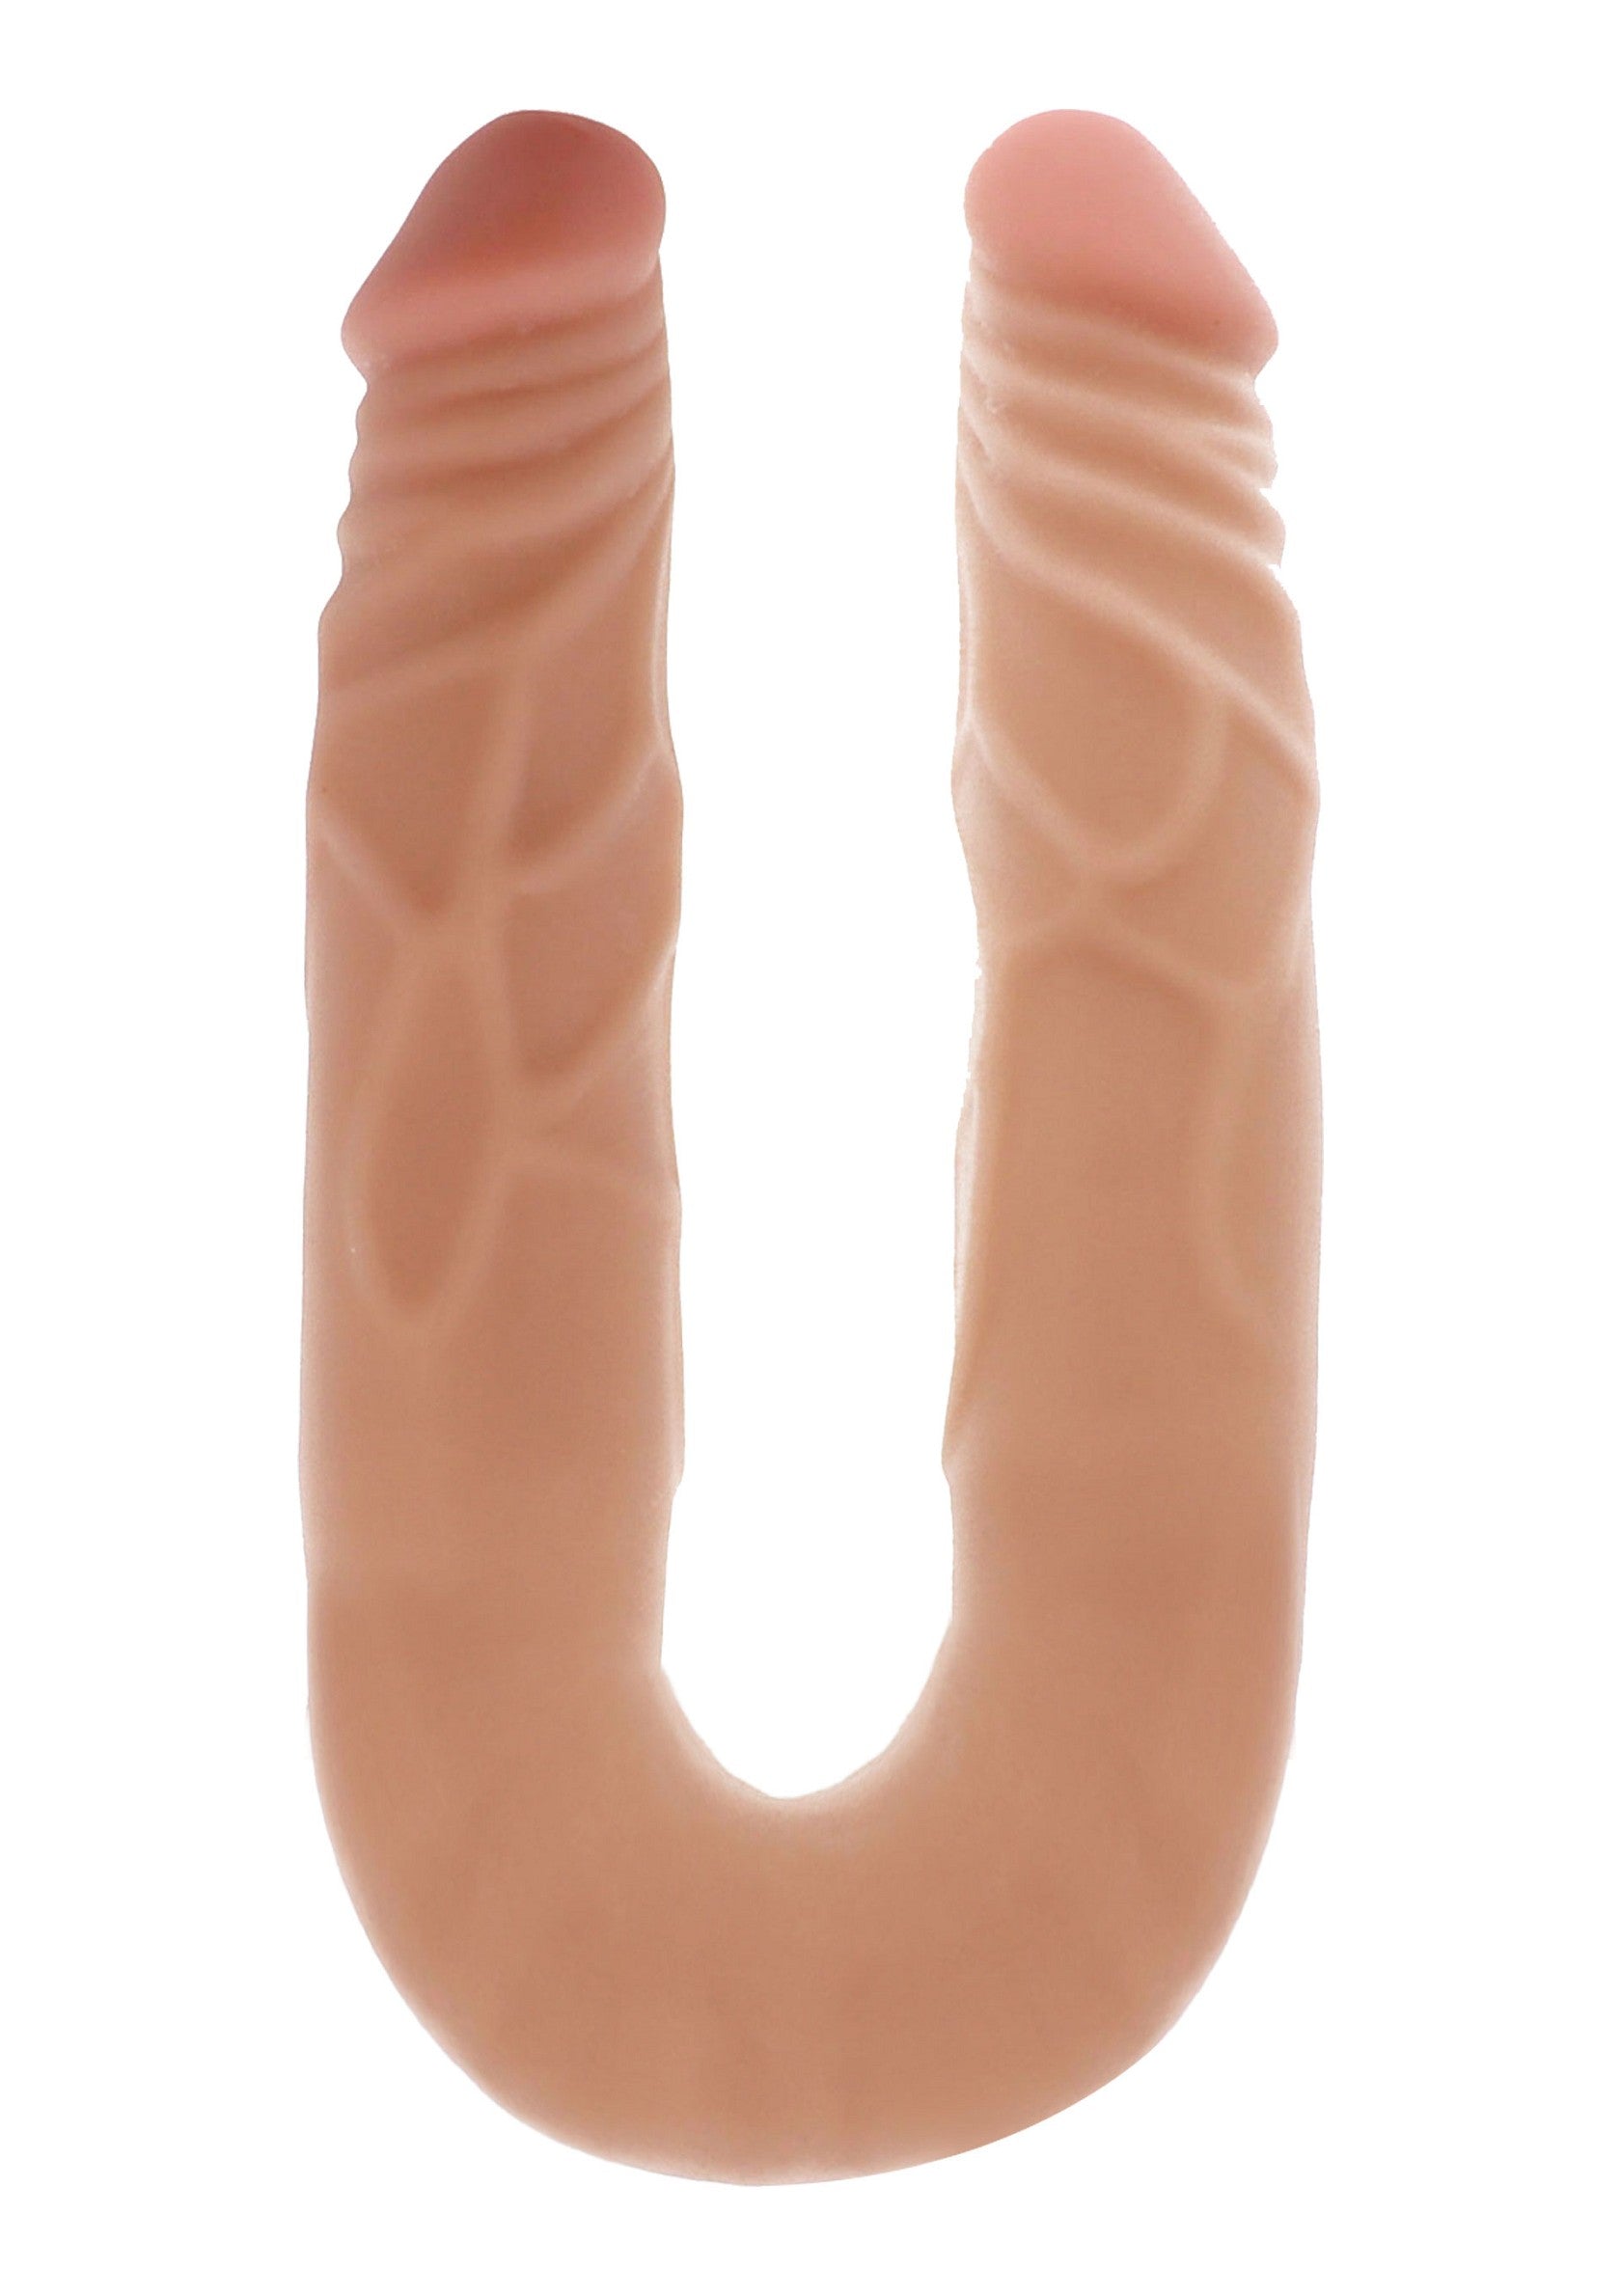 ToyJoy Get Real Double Dong 14' SKIN - 5